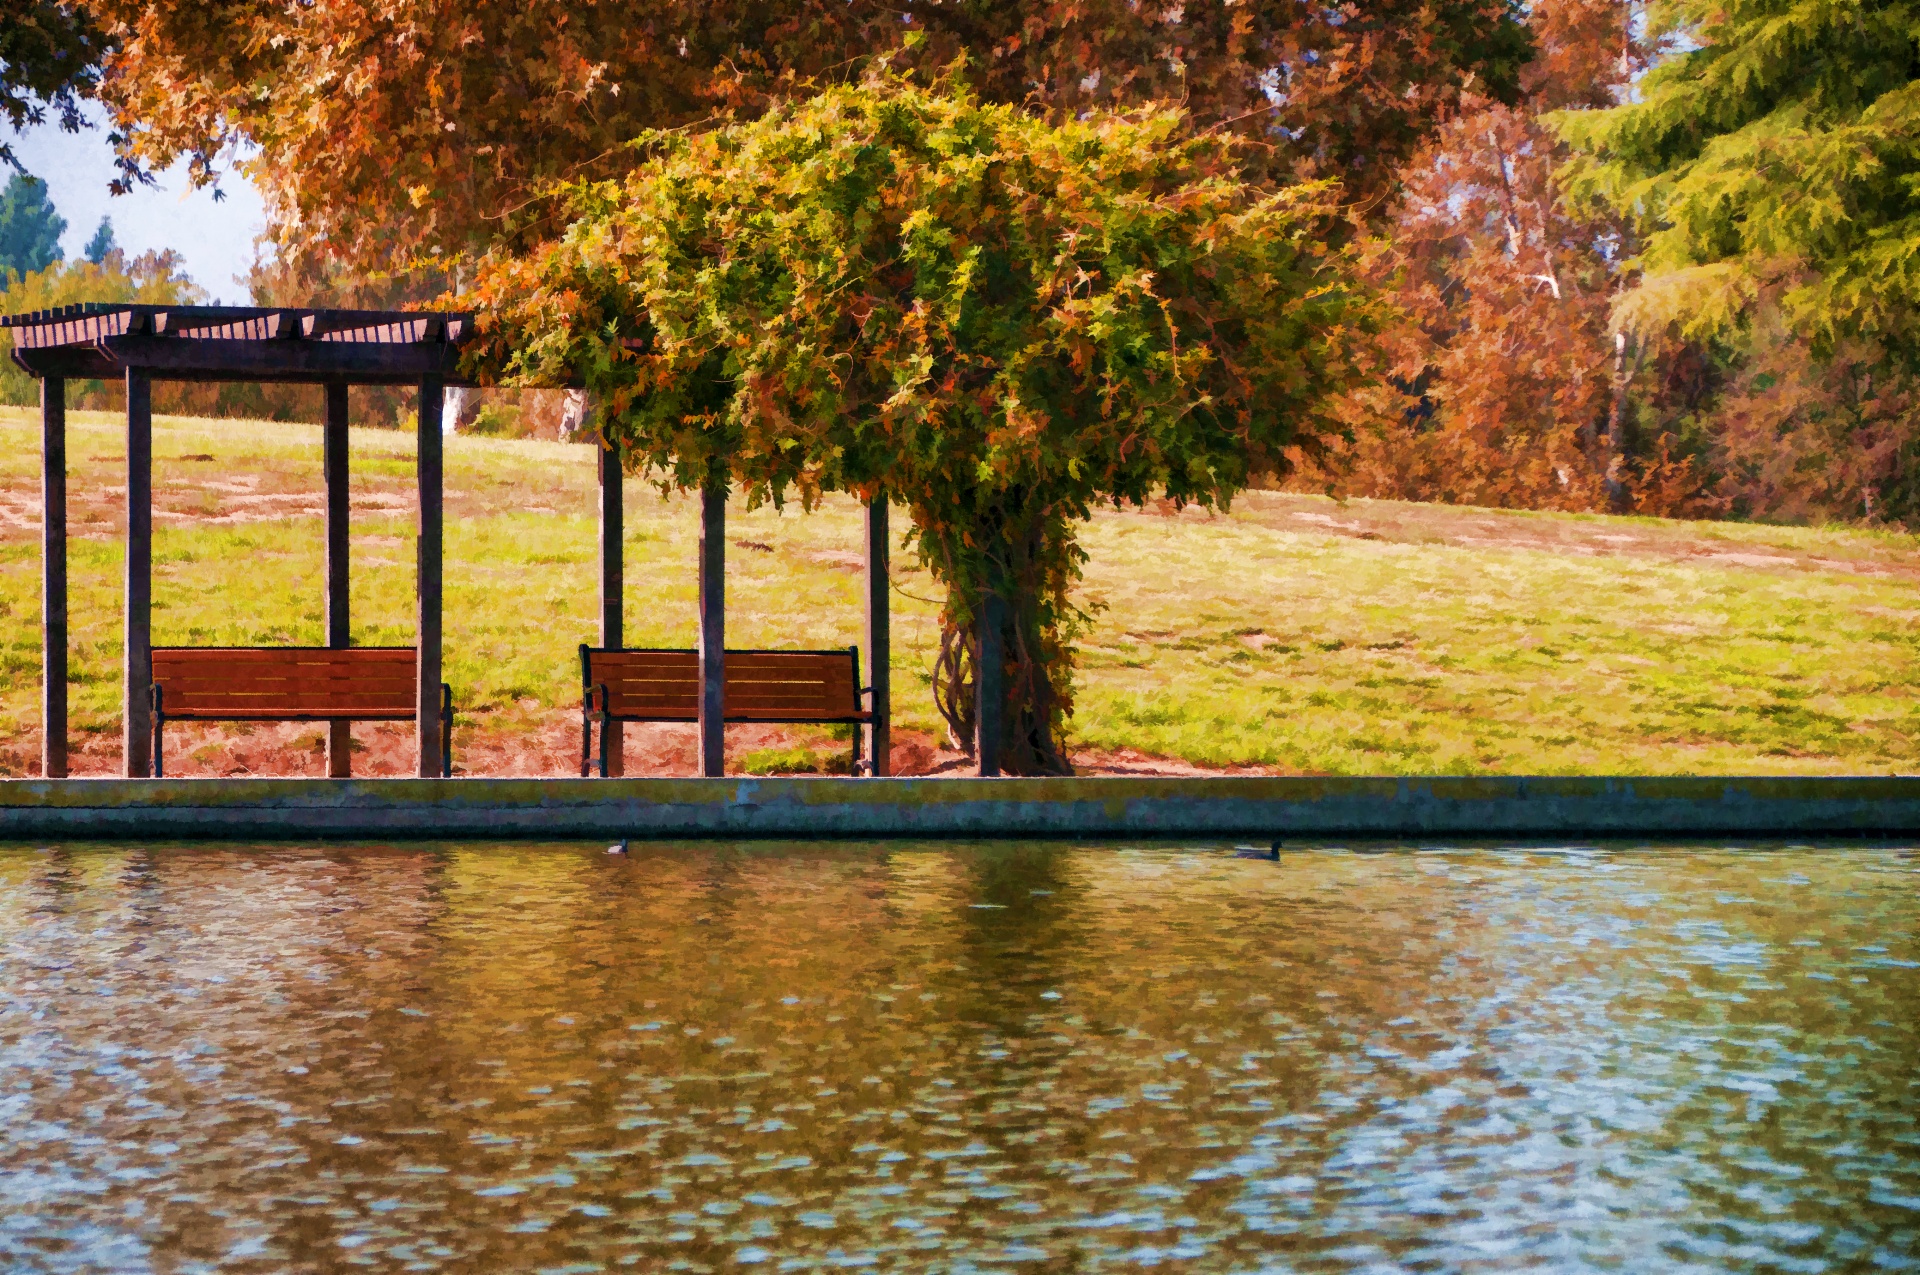 fall painterly image of two benches next to lake with ducks swimming by